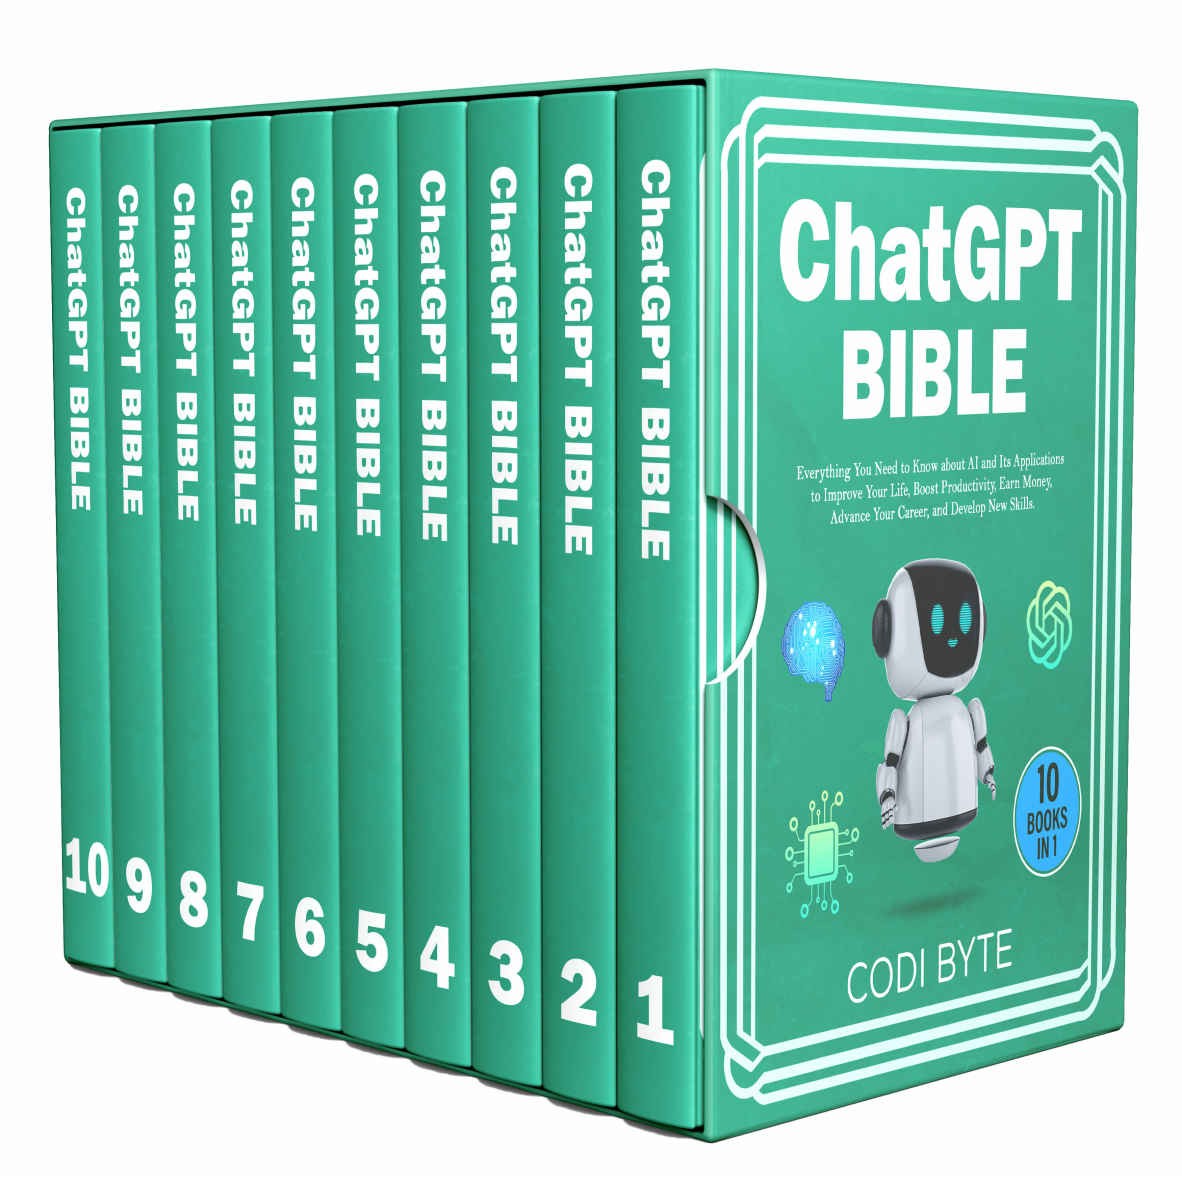 Chat GPT Bible - 10 Books in 1: Everything You Need to Know About AI and Its Applications to Improve Your Life, Boost Productivity, Earn Money, Advance Your Career, and Develop New Skills.